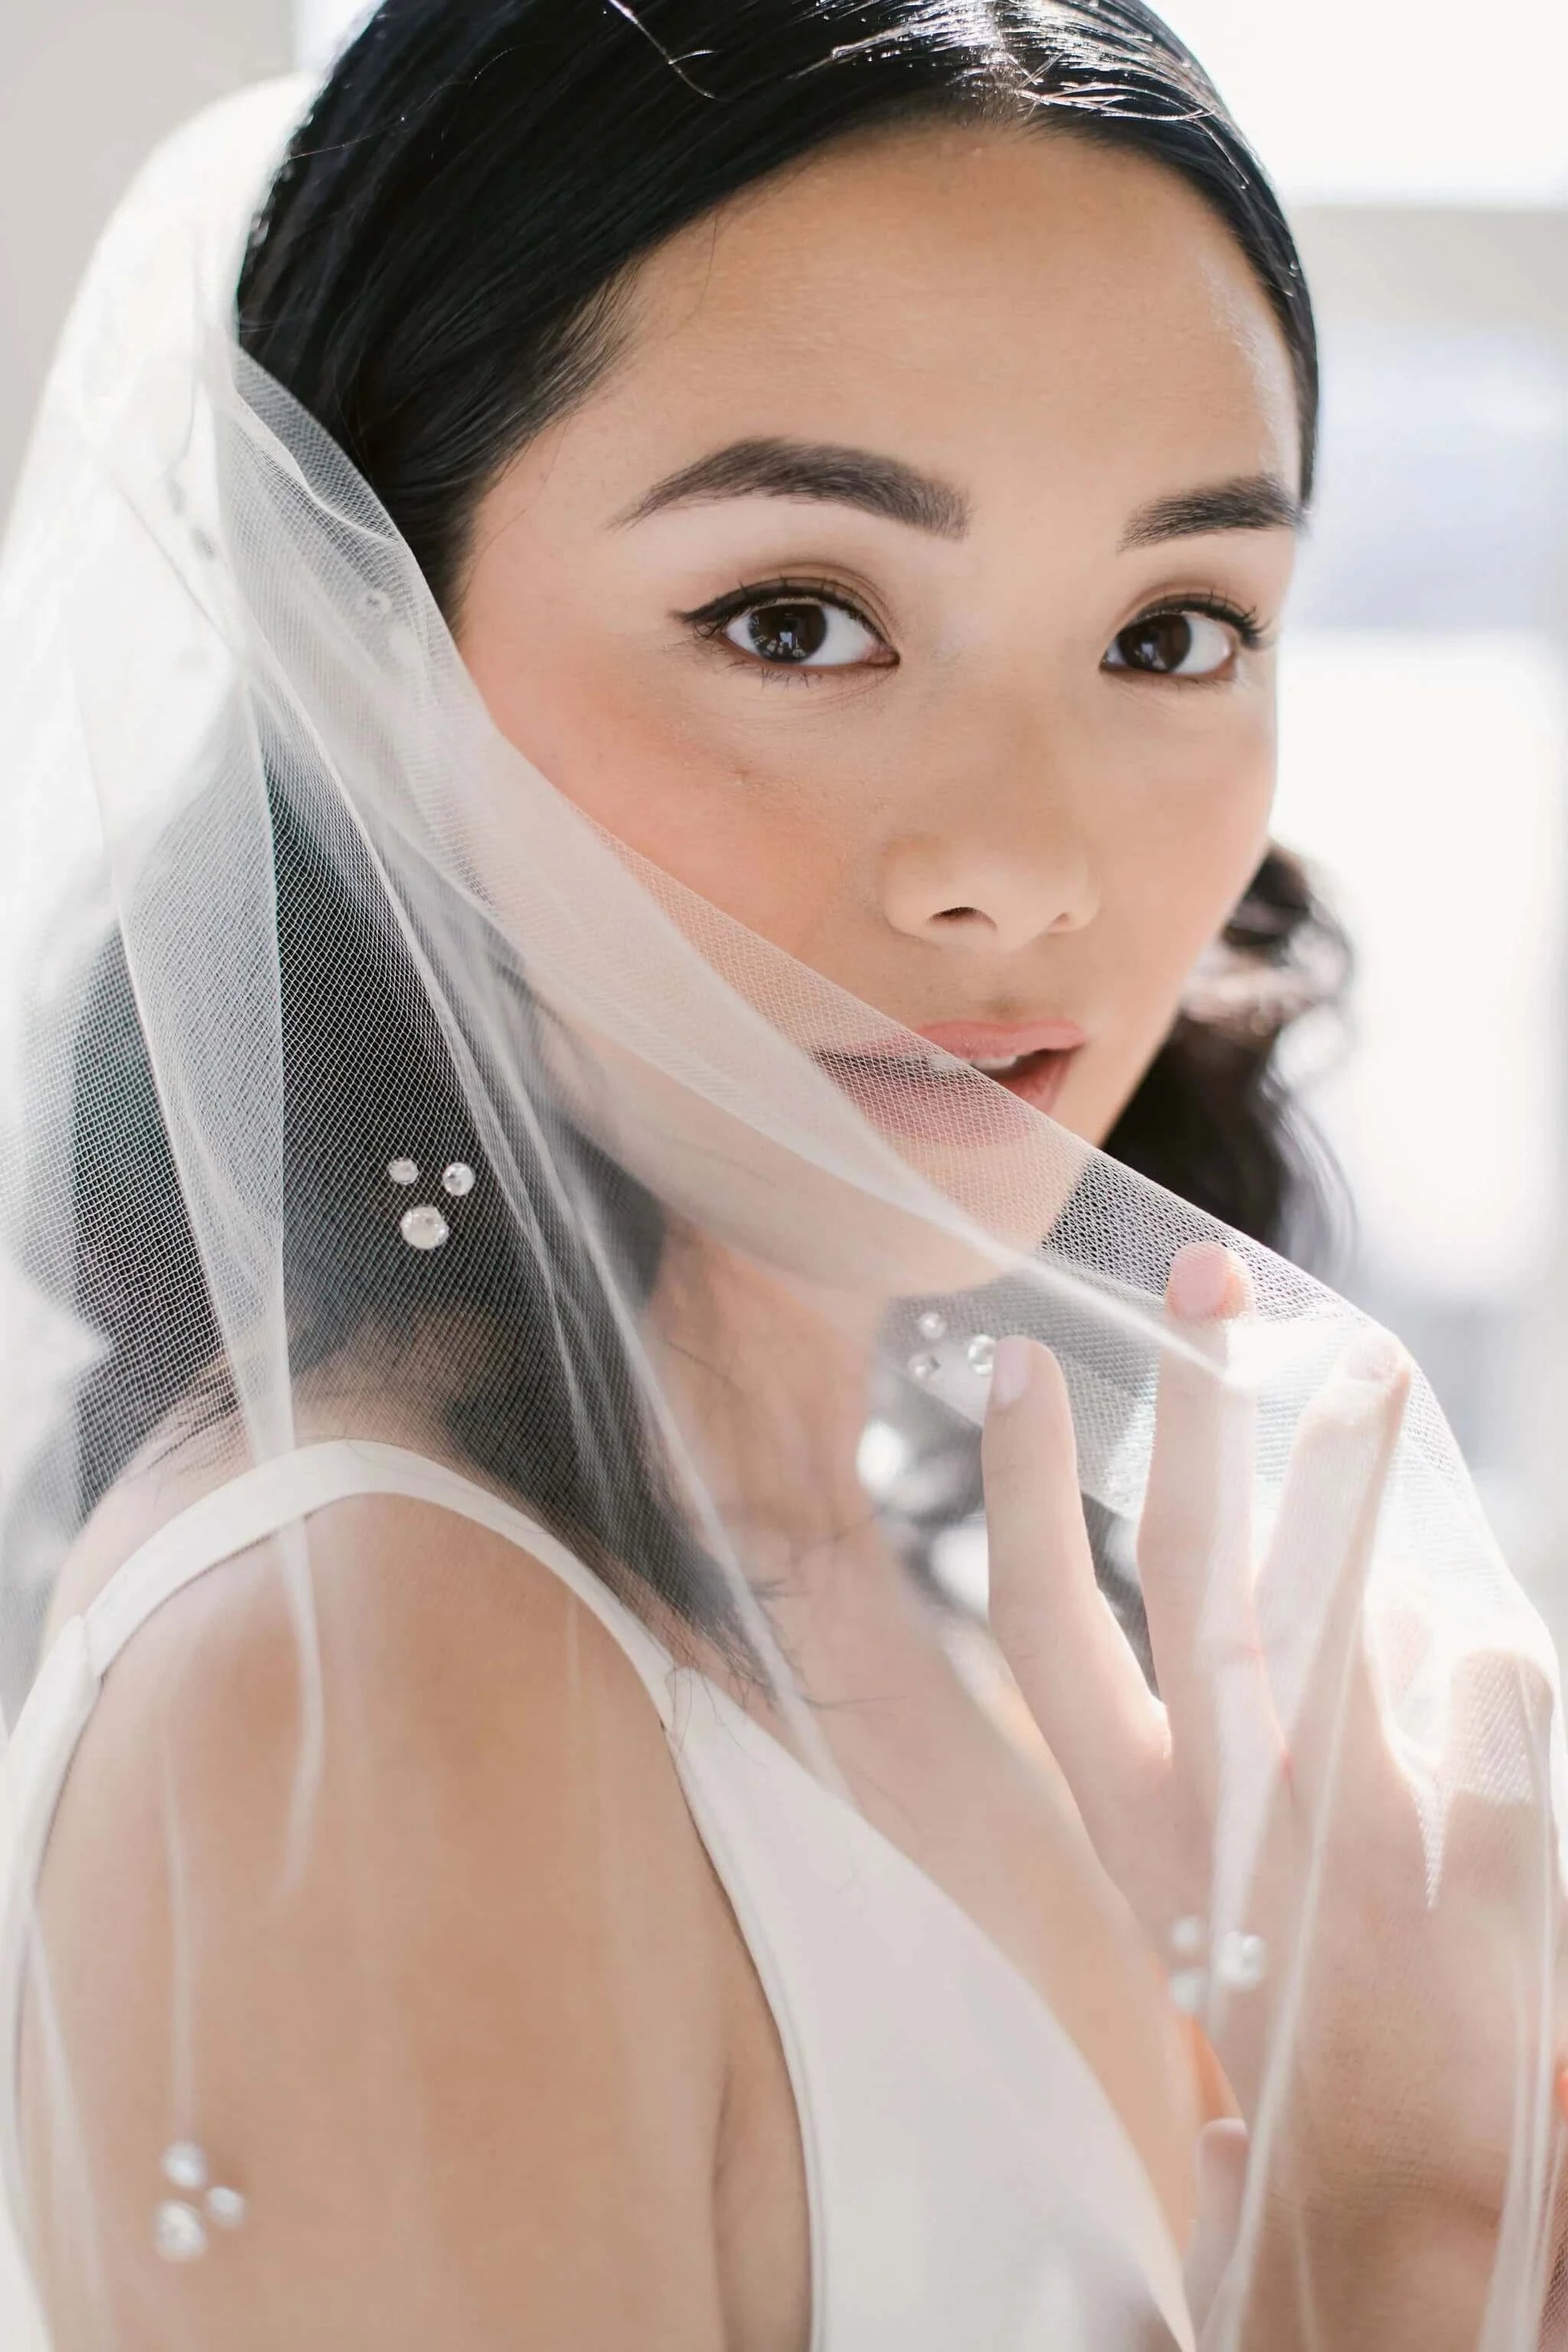 Tessa Kim Mini Tulle Birdcage Veil with Crystal Pearl Accents - Ready to Ship White / Gold Comb / M